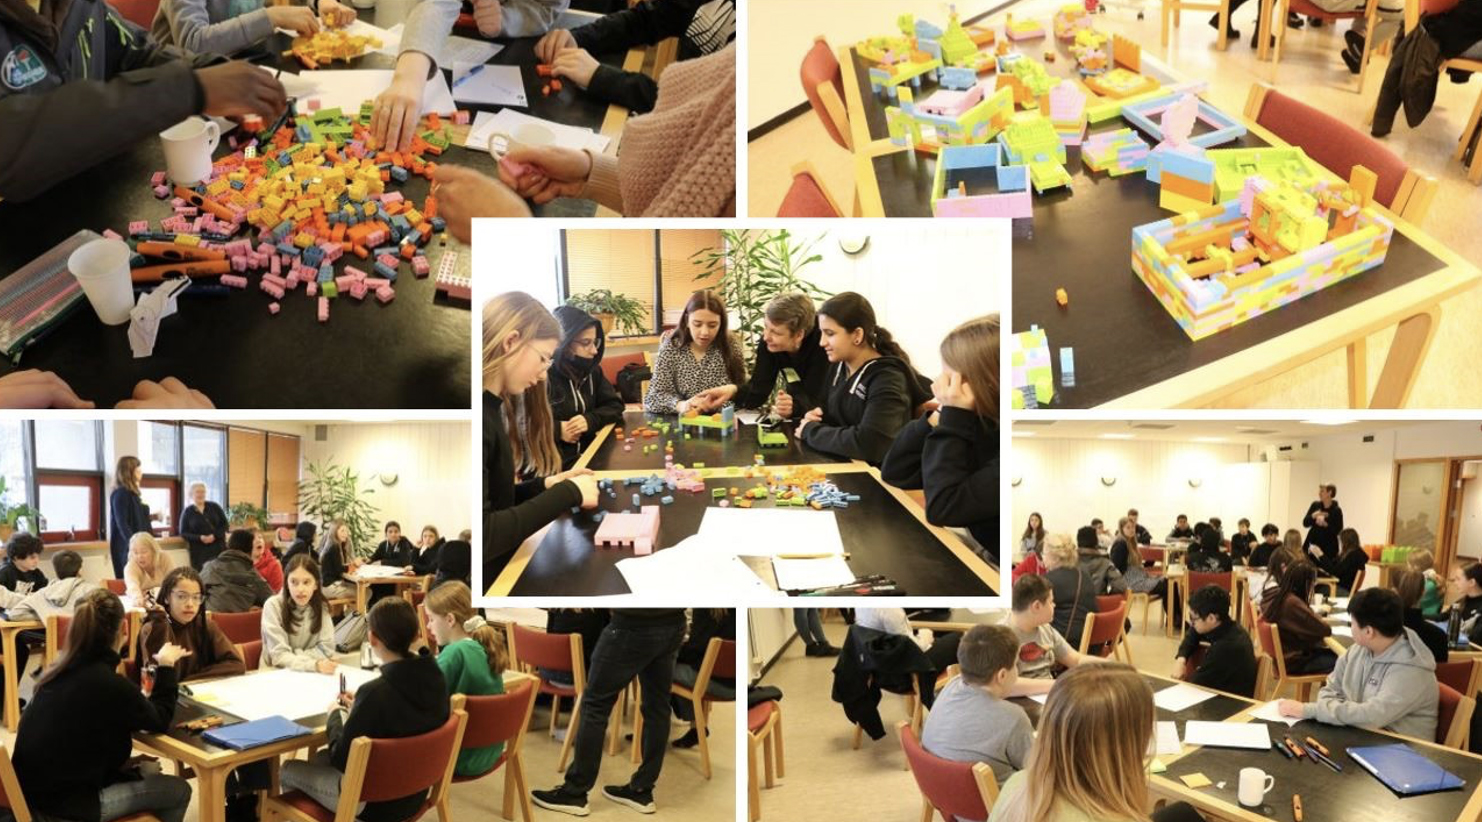 A collage of five images showing the participating learners engaged in an activity to use Lego blocks to re-create places within the school that they like.